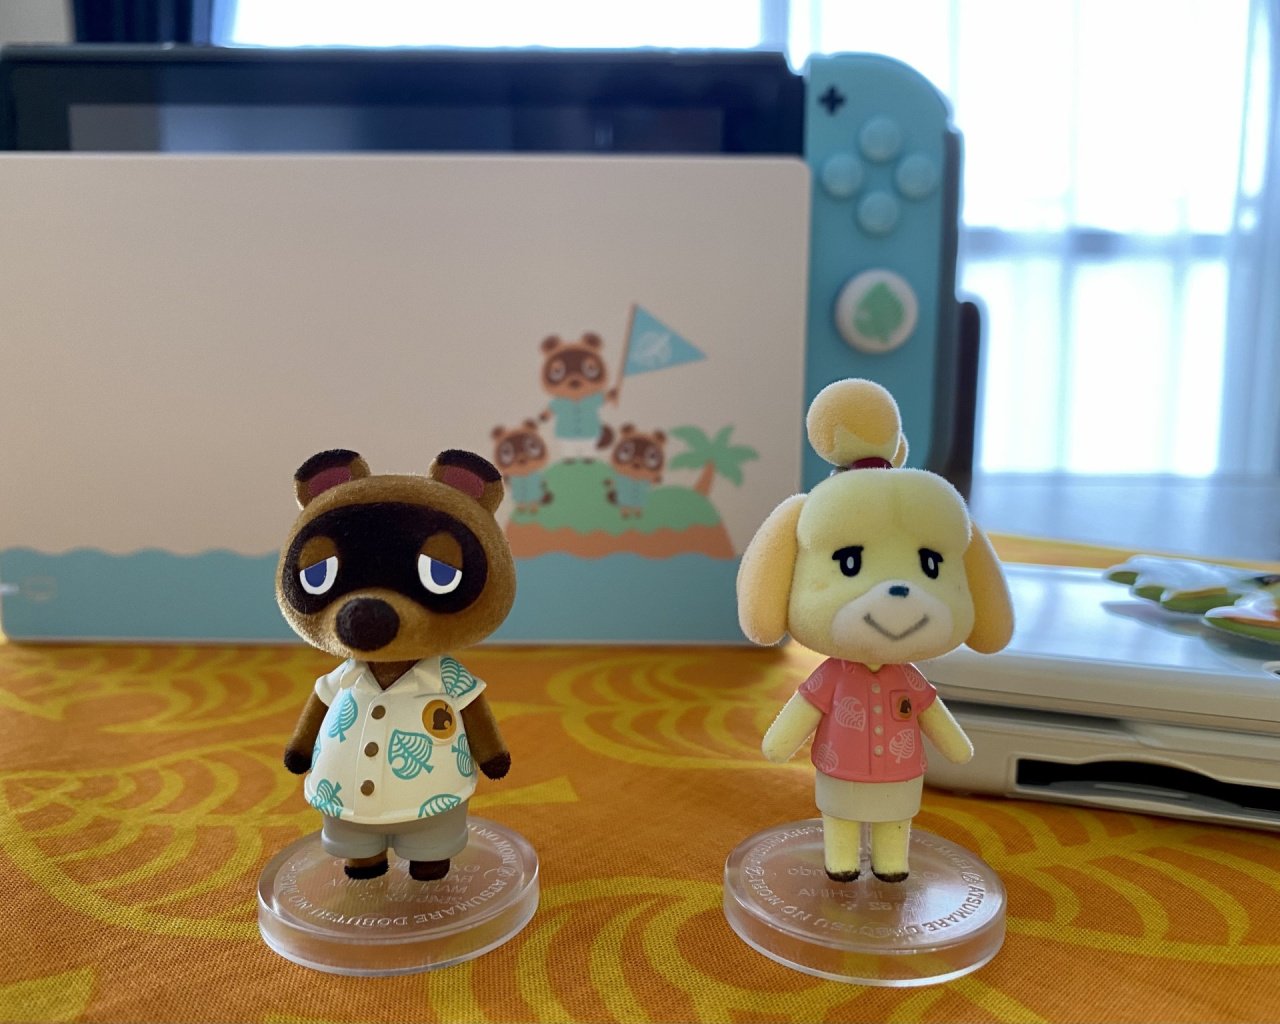 These Japan-Only Animal Crossing Figurines Are So Darn Cute, Fans Are  Struggling To Find Them - Feature | Nintendo Life